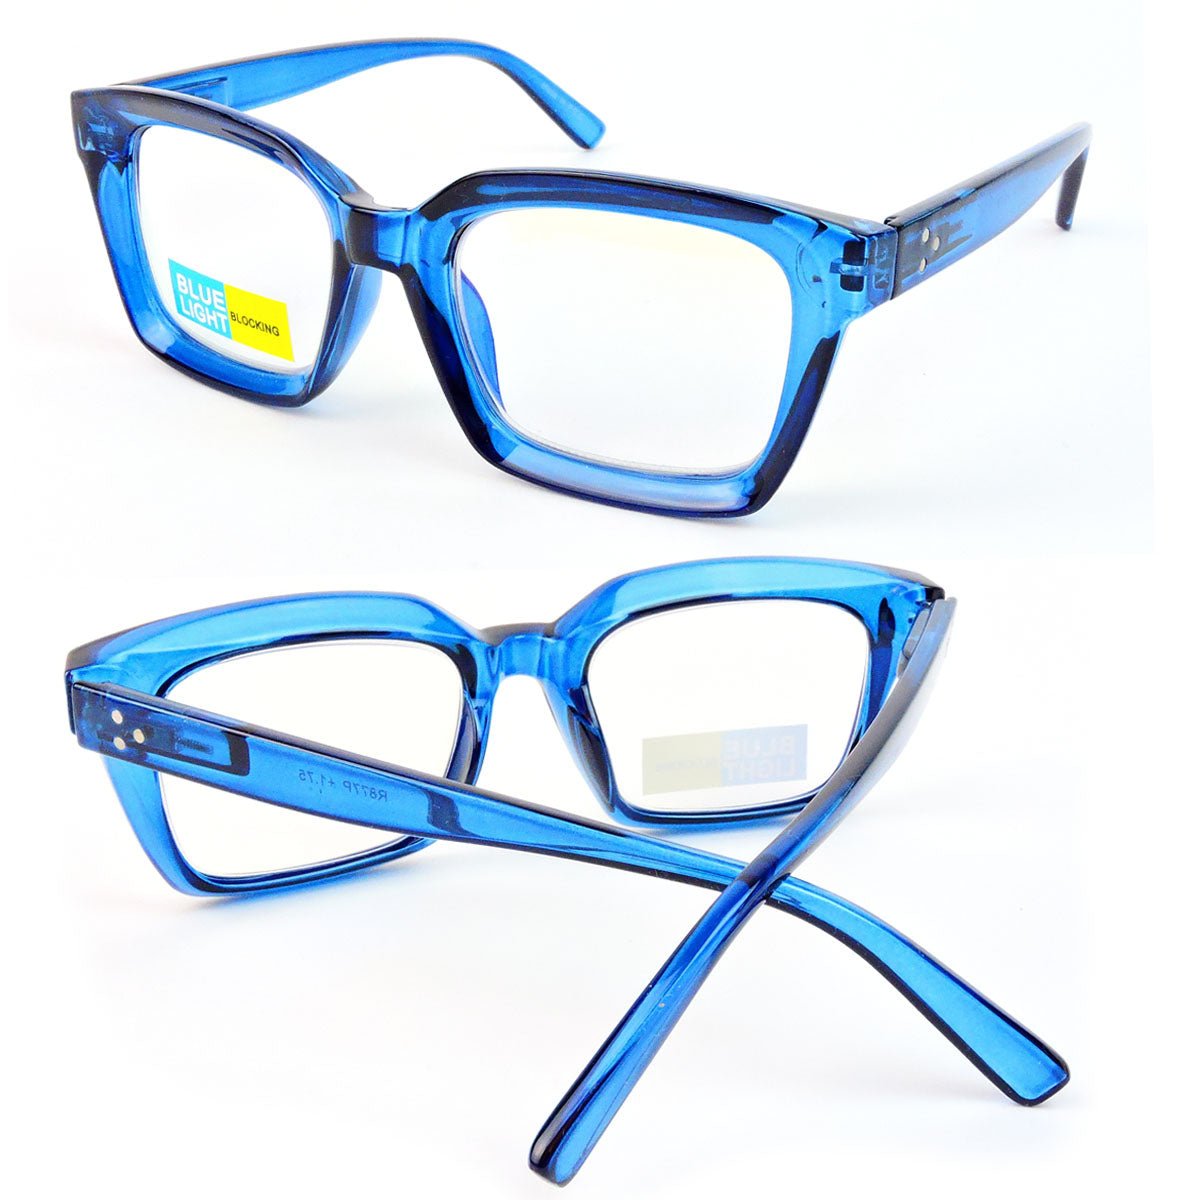 Blue Light Blocking Glasses Thick Rectangle Preppy Look - Reading Glasses - Leopard, +2.00